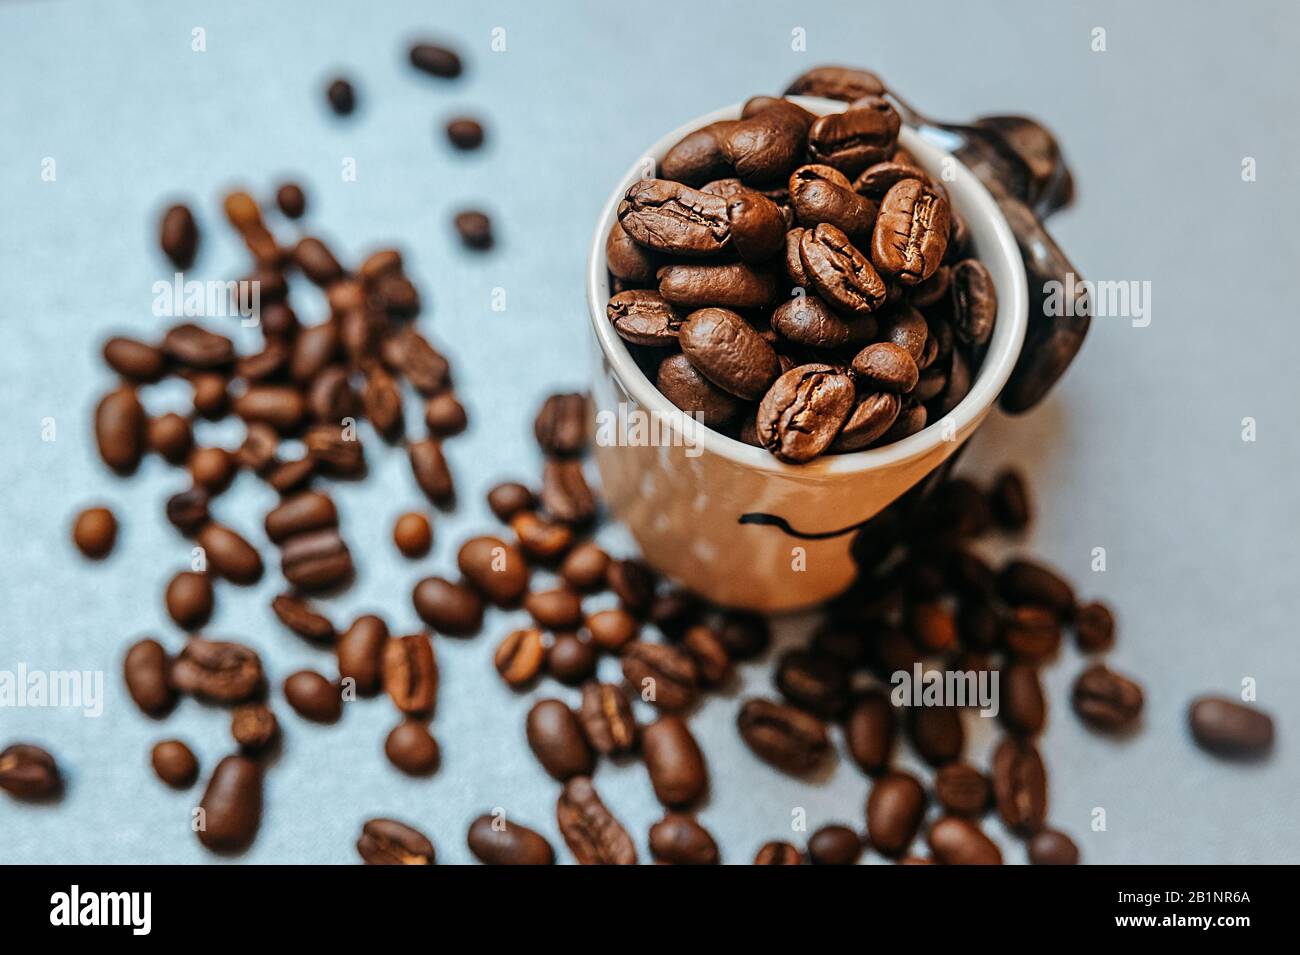 ready-made picture for coffee advertising and ready for publication, a large number of coffee roasted beans are scattered around a white mug full of b Stock Photo